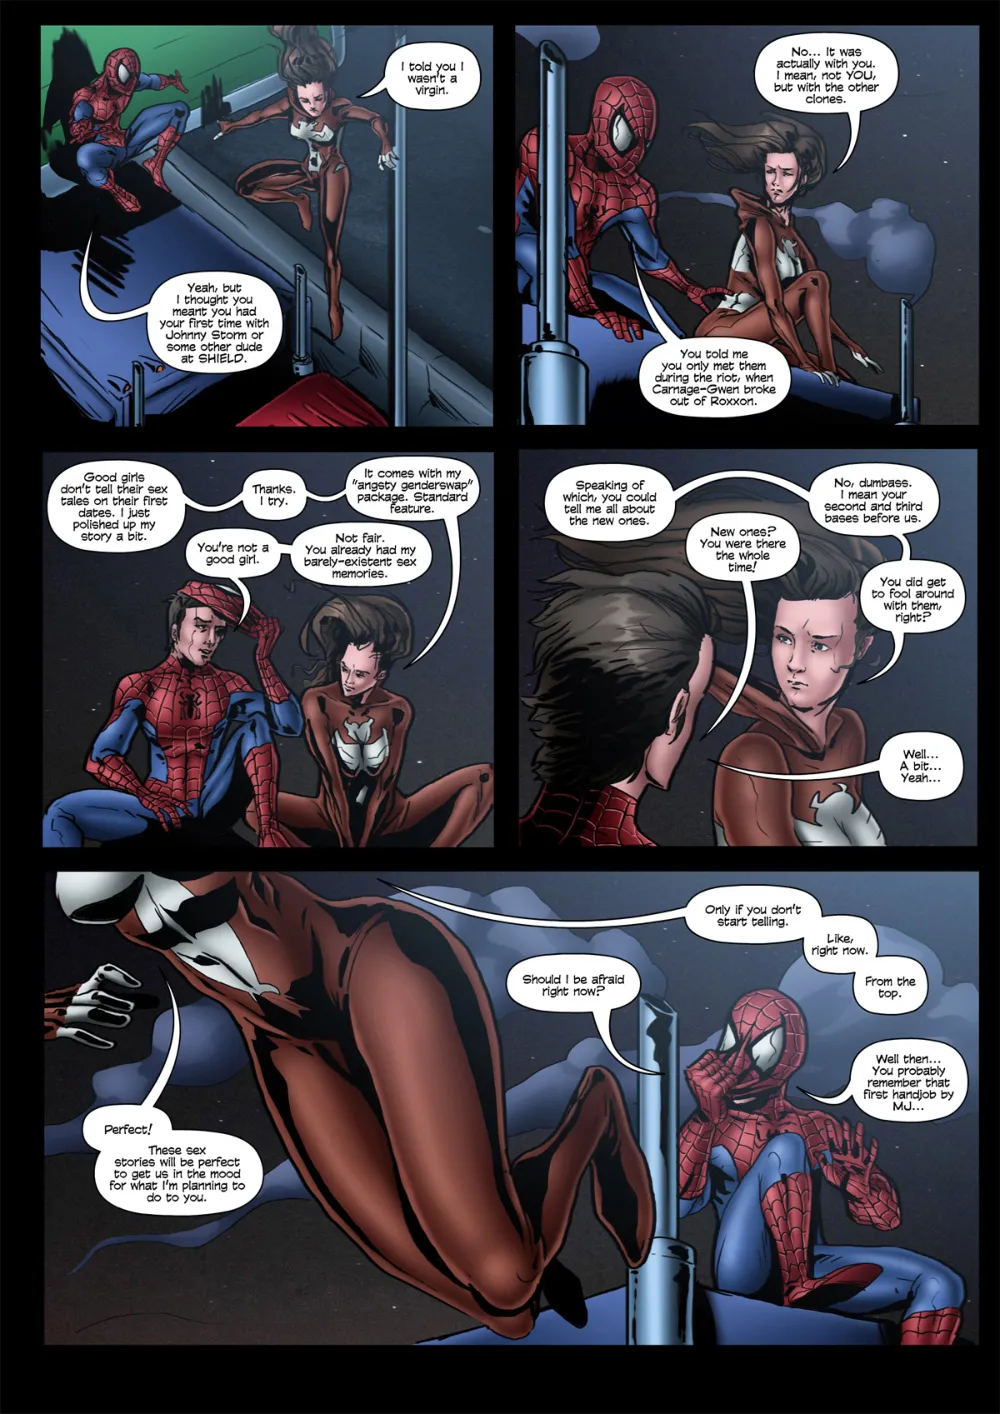 Ultimate Spider-Man XXX 7 - Spidercest - the stuff wet dreams are made of - Page 5